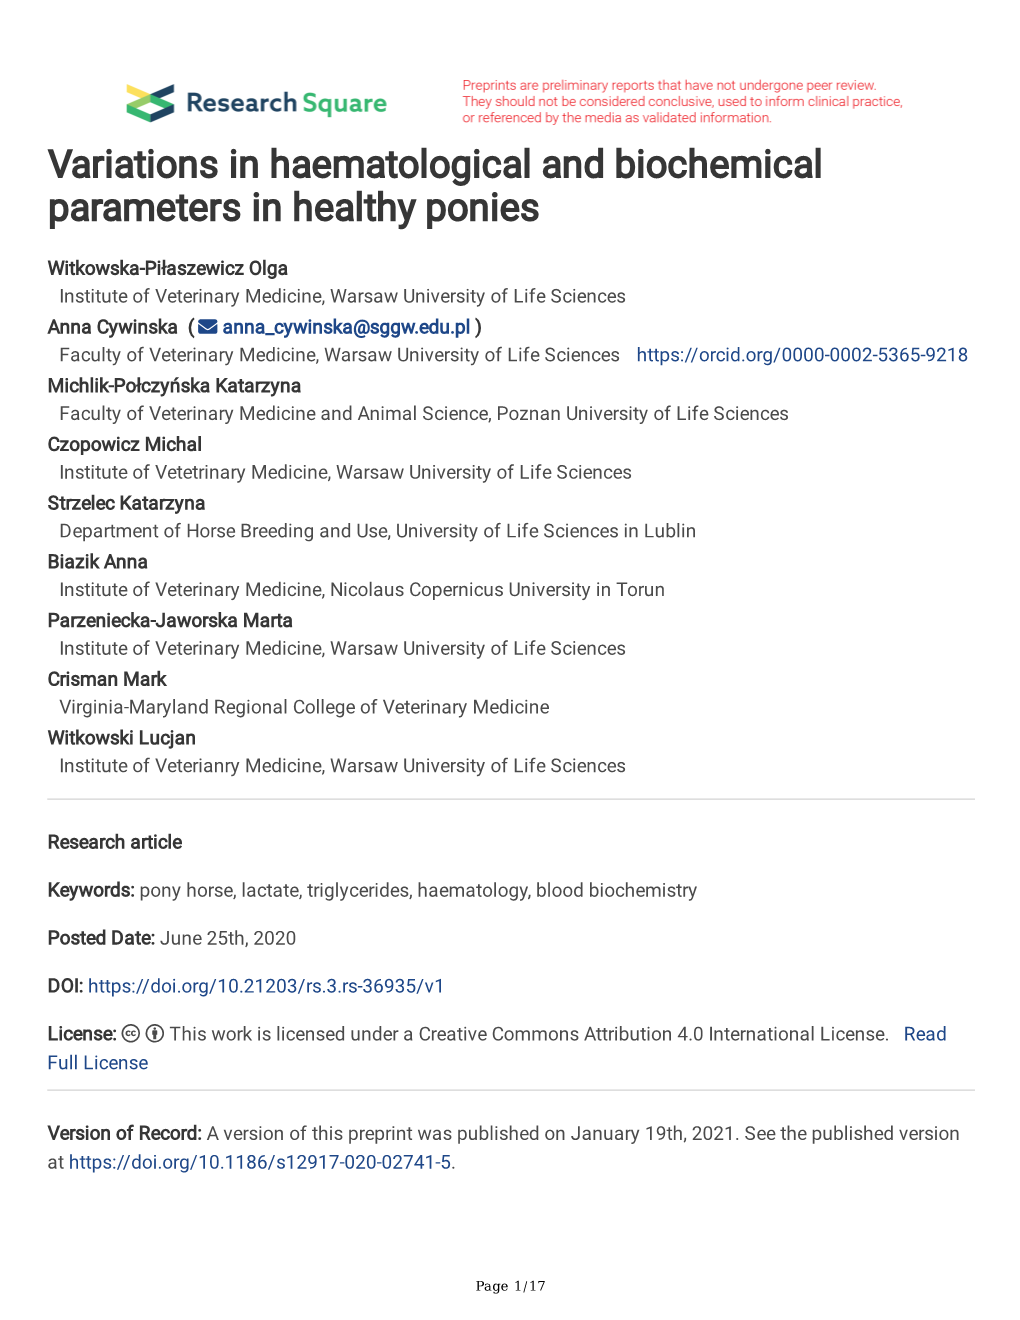 Variations in Haematological and Biochemical Parameters in Healthy Ponies